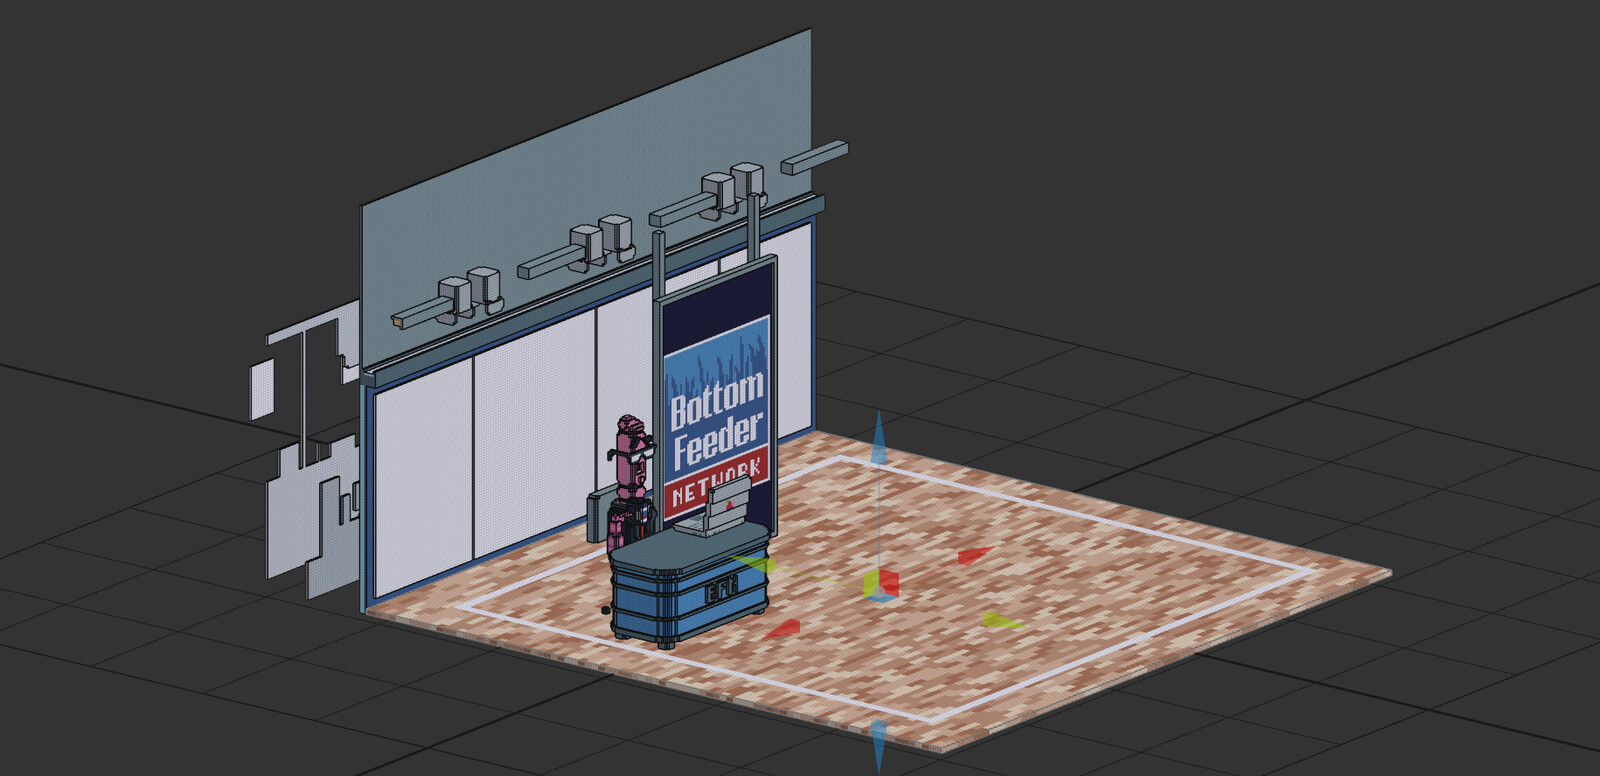 Magicavoxel workspace view of the Politics: A Worm's Perspective voxel model.